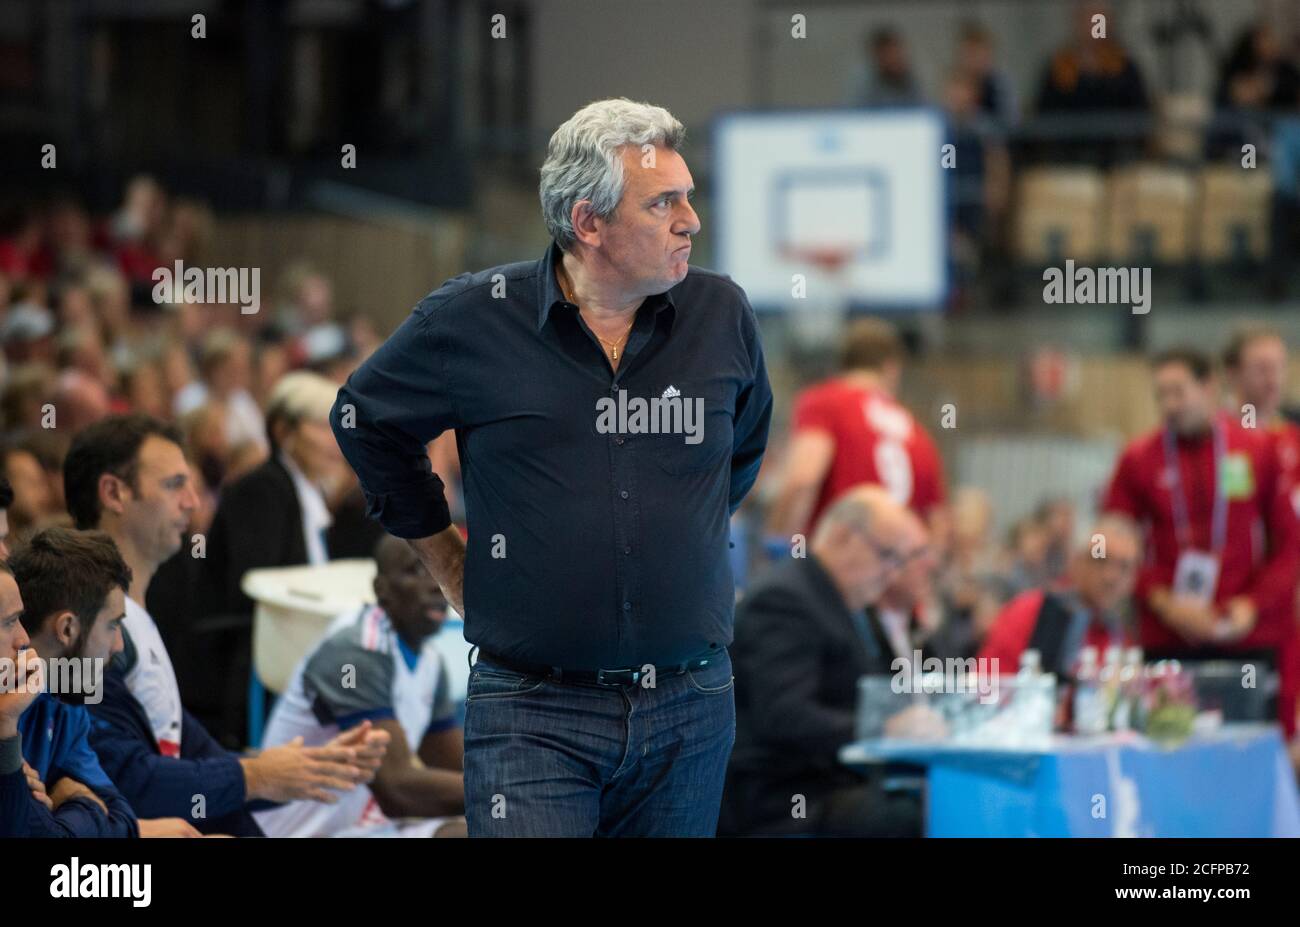 Head coach of France, Claude Onesta, seen on the sideline in the men’s handball match between Norway and France at the Golden League tournament in Oslo (Gonzales Photo/Jan-Erik Eriksen). Oslo, November 08th, 2015. Stock Photo